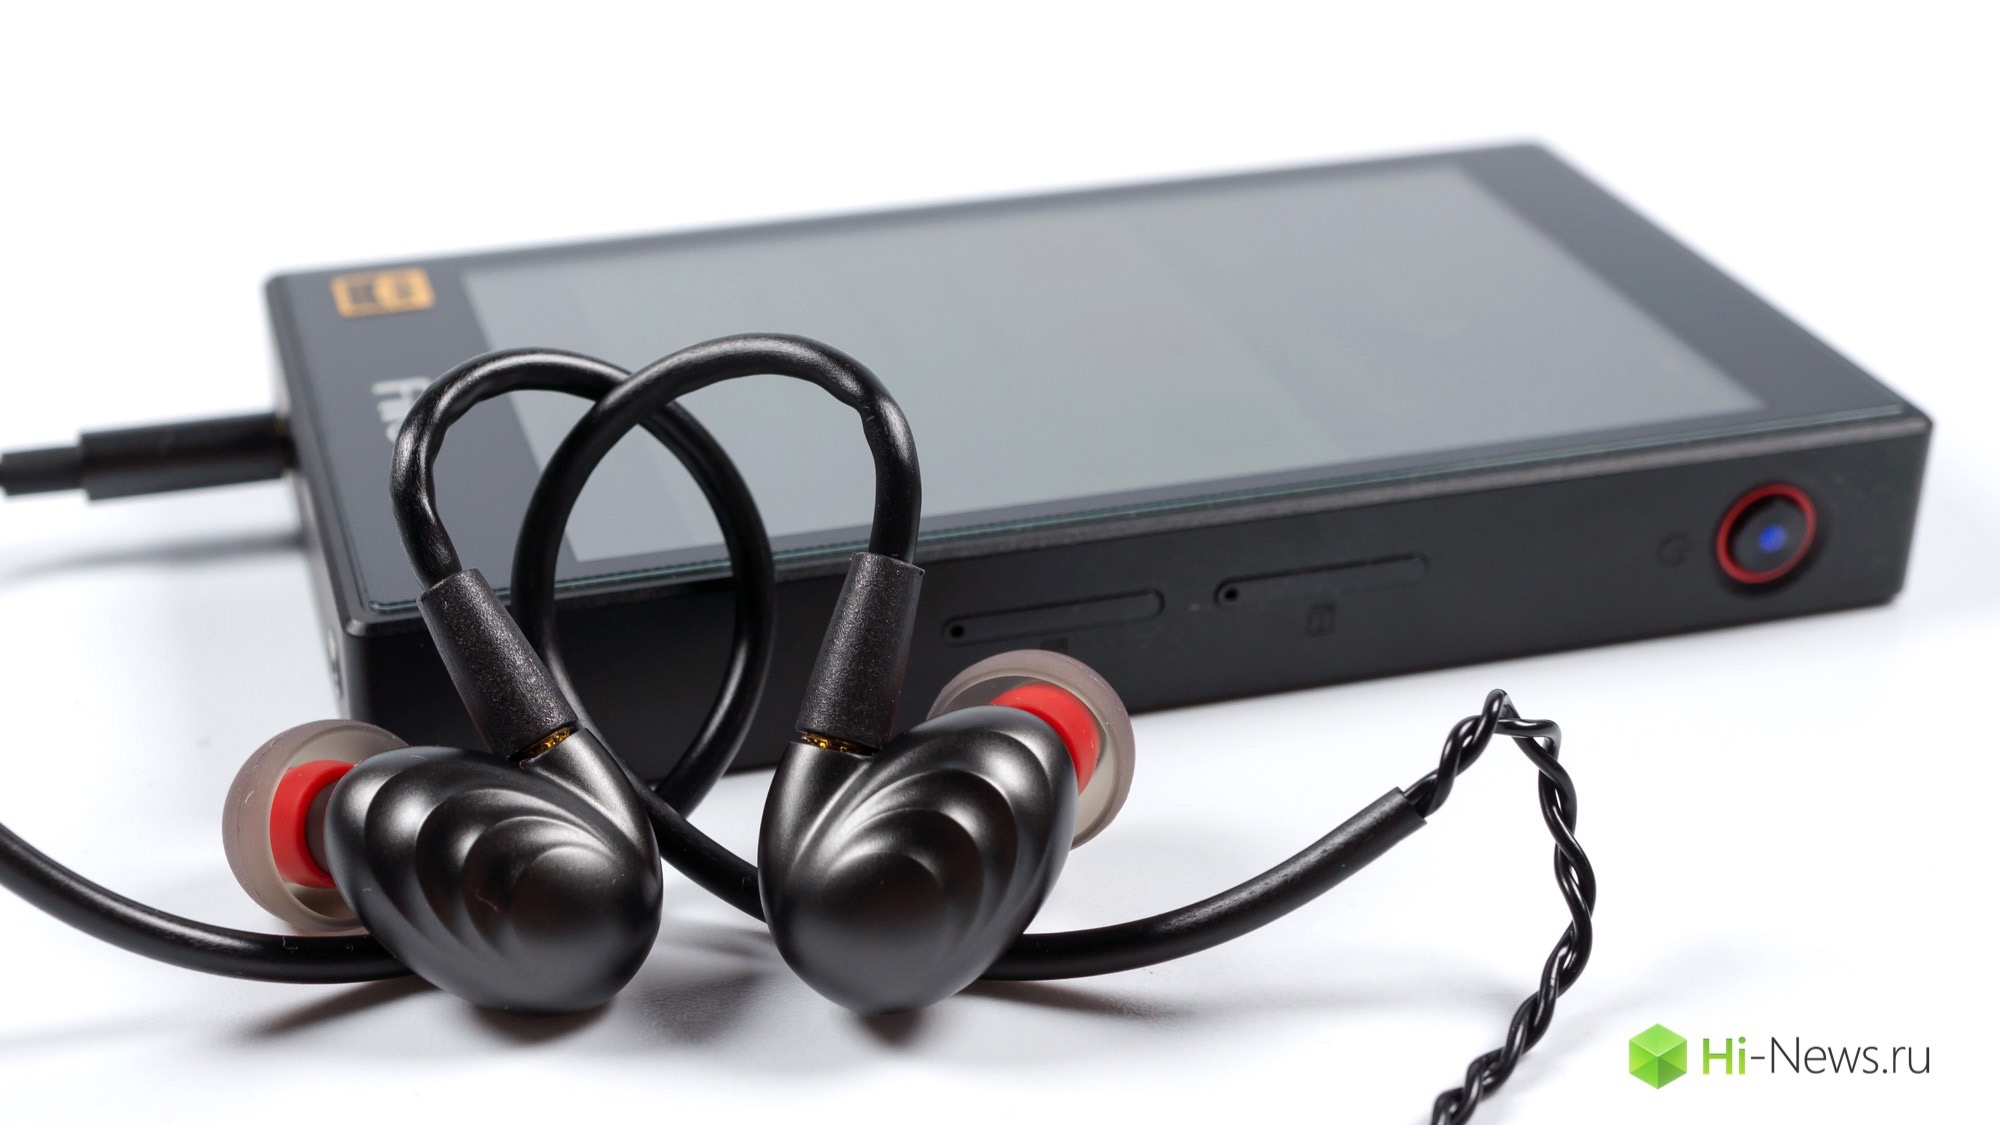 Overview headphones Fiio F9 — first hybrid of the company